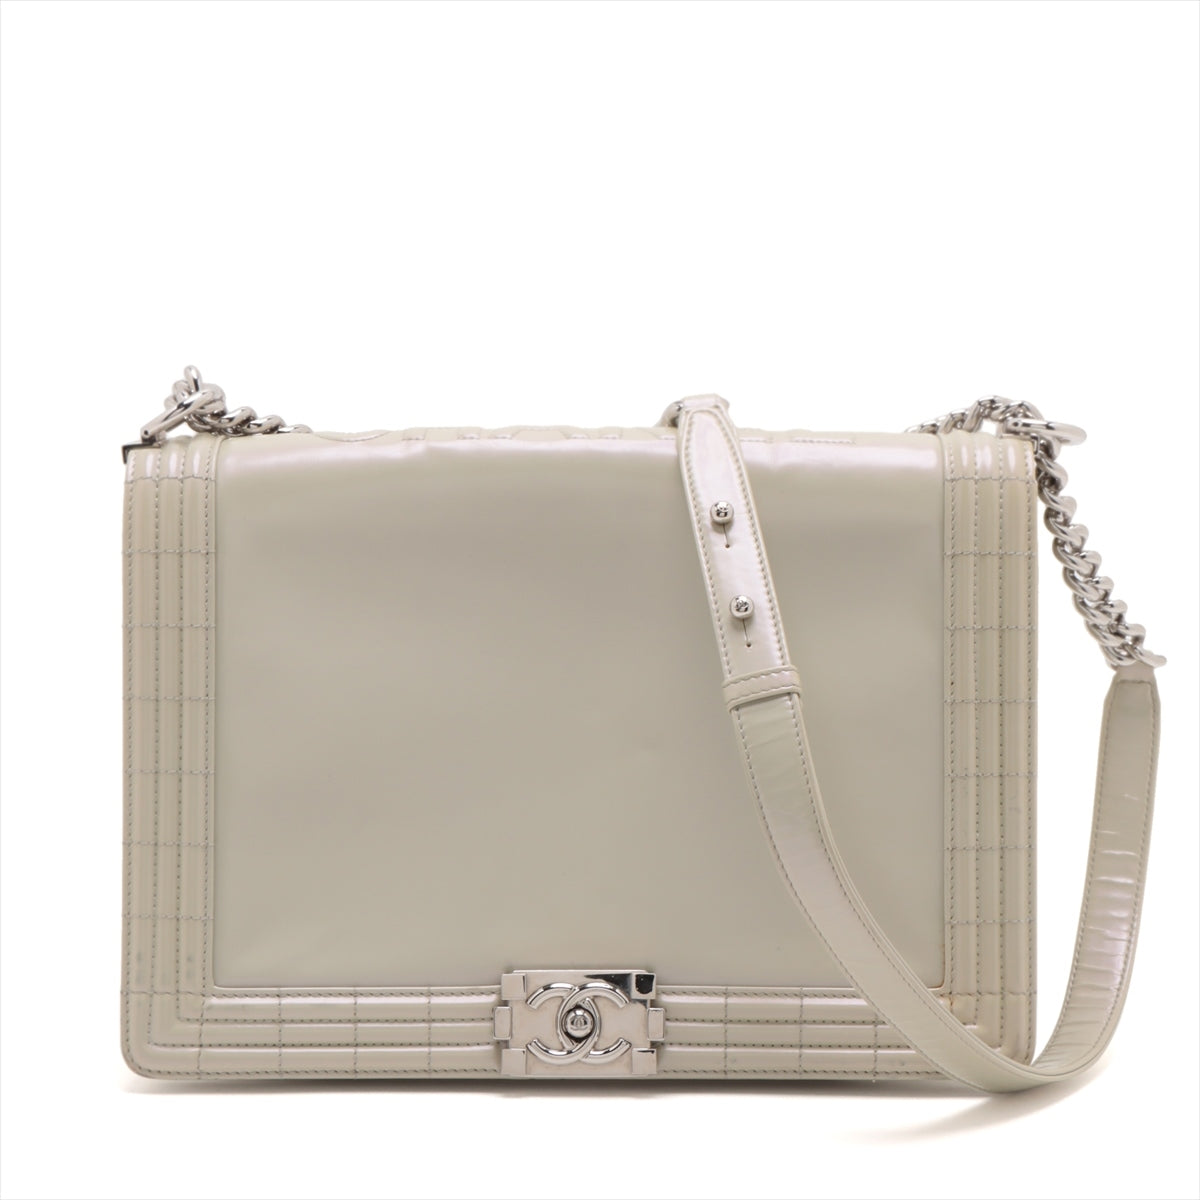 Chanel Boy Chanel Patent Leather Chain Shoulder Bag pearl white Silver Metal Fittings 16XXXXXX